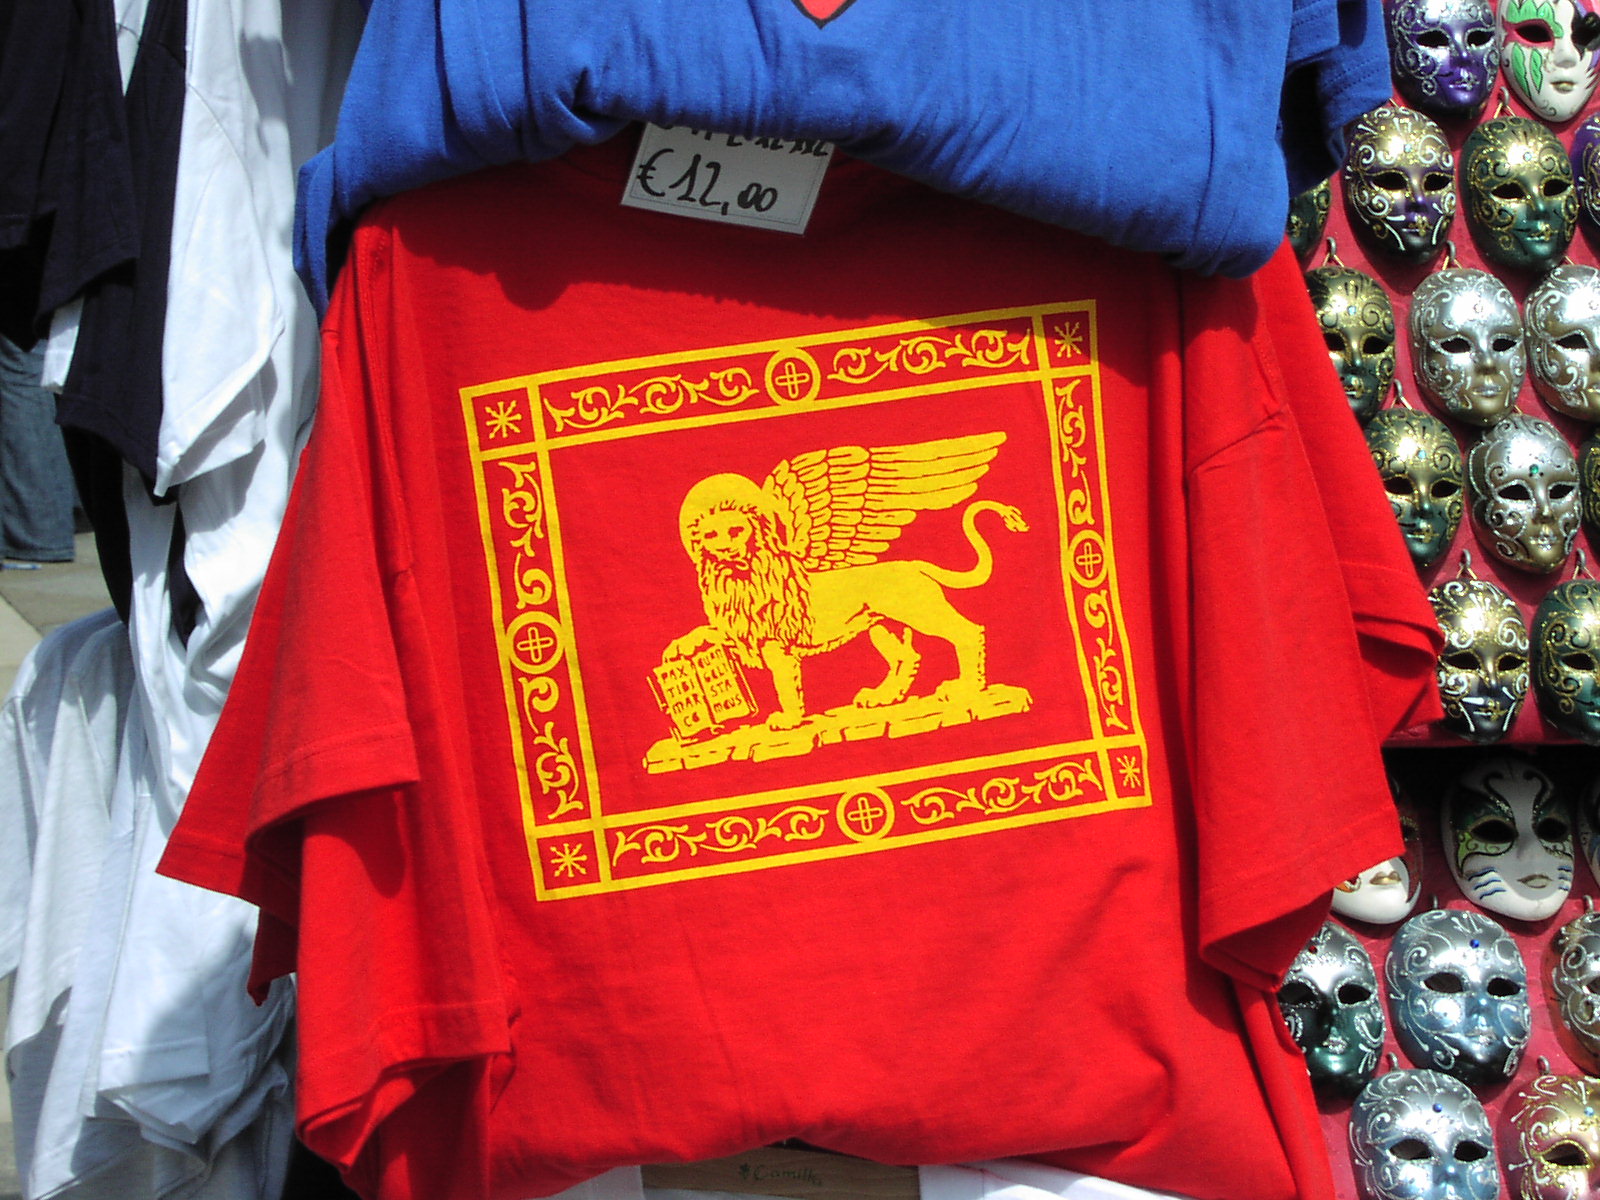 a red t shirt with a gold lion and winged winged creature printed on it